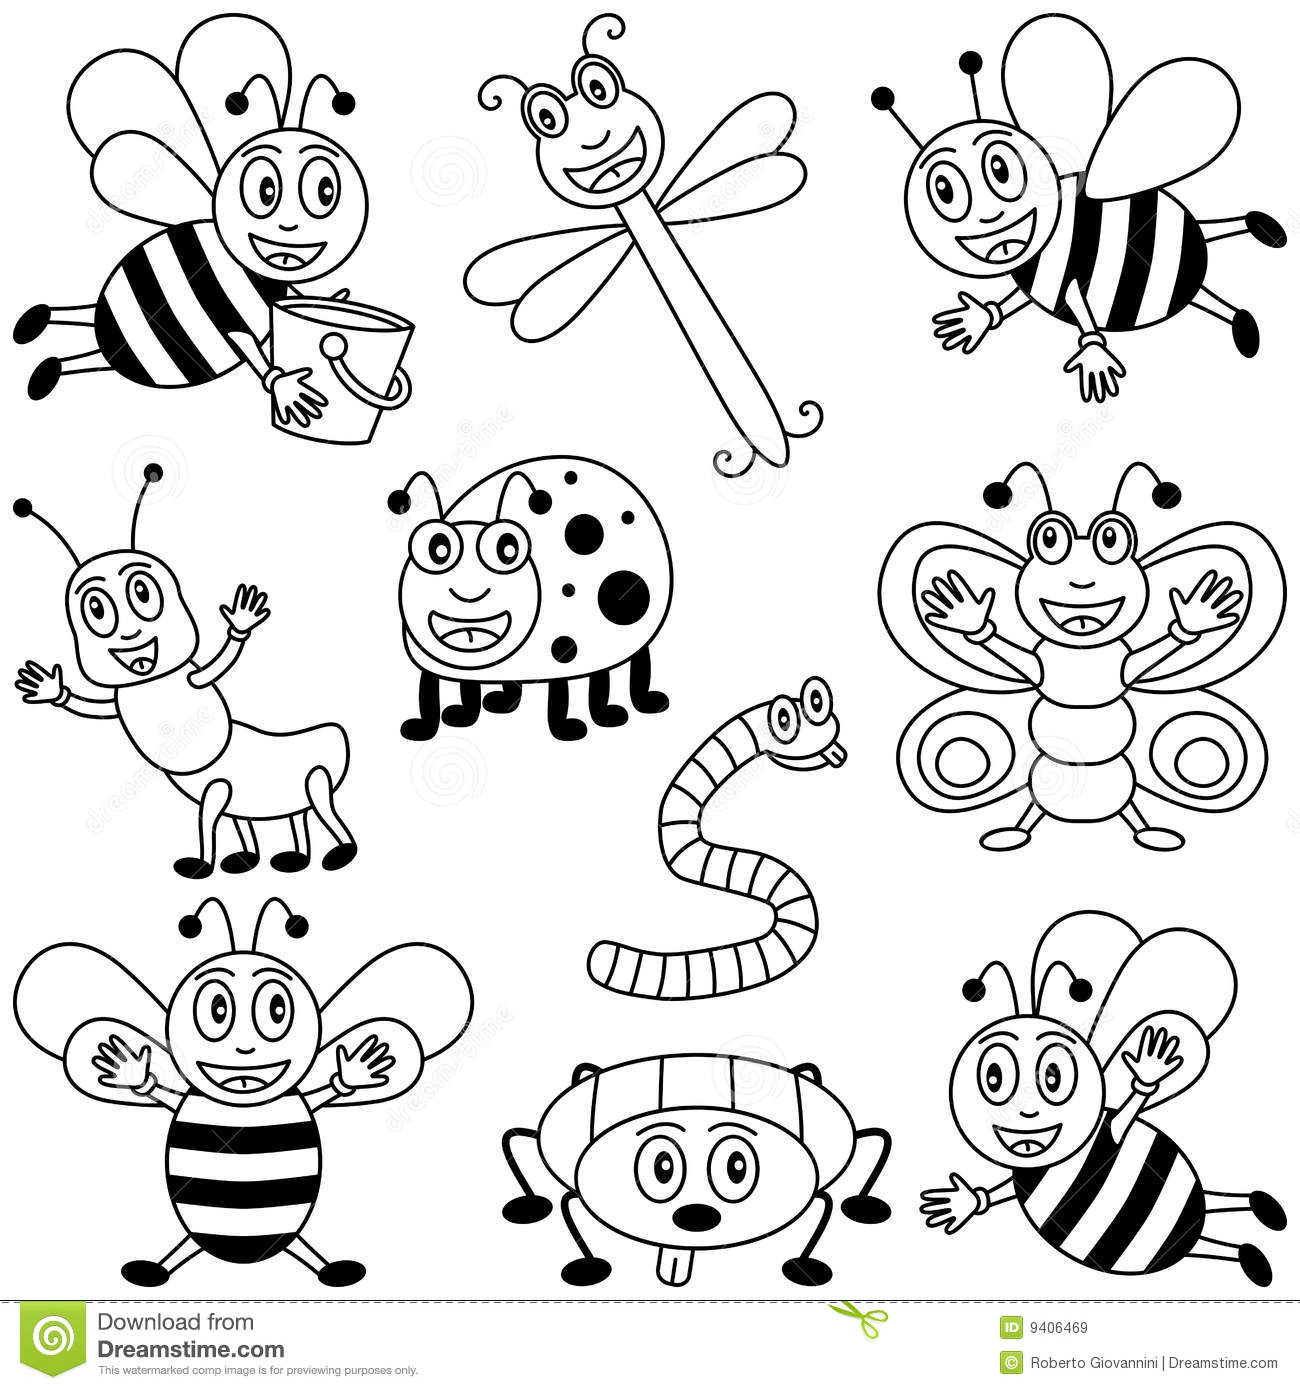 Royalty Free Stock Images  Coloring Insects For Kids